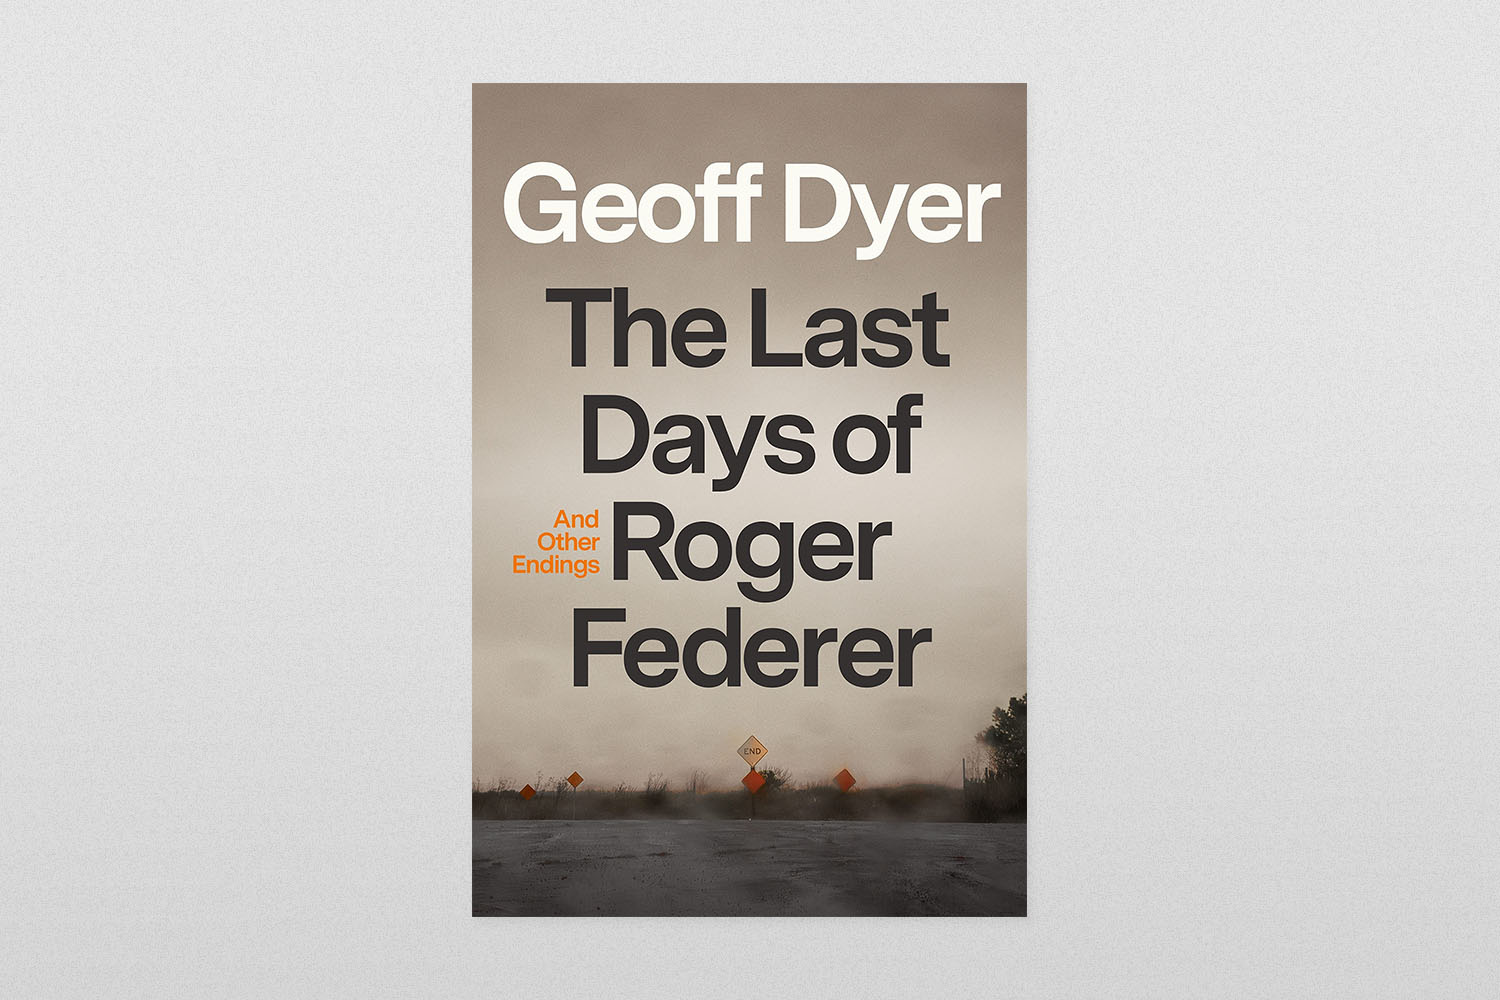 The Last Days of Roger Federer- And Other Endings by Geoff Dyer